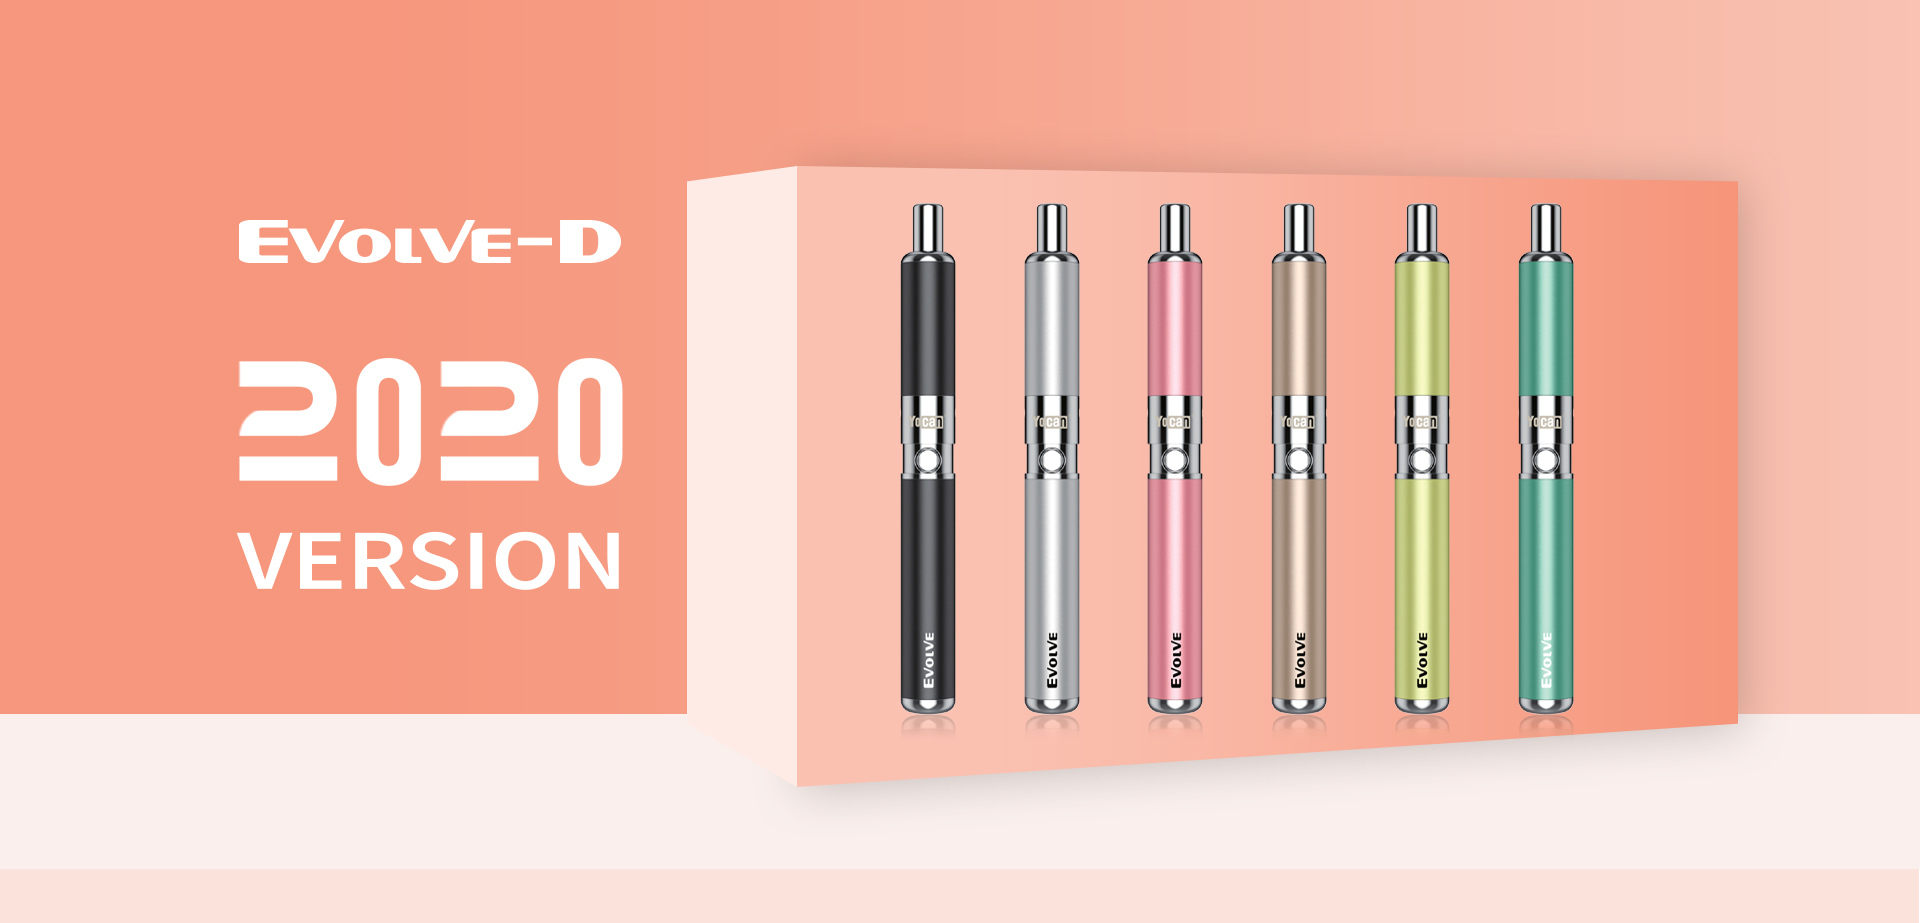 Yocan Evolve-D vaporizer pen 2020 version toke on the go conveniently and discreetly with the Yocan Evolve-D easy to use e-pipe combustion pen for dry herb and flower blends.